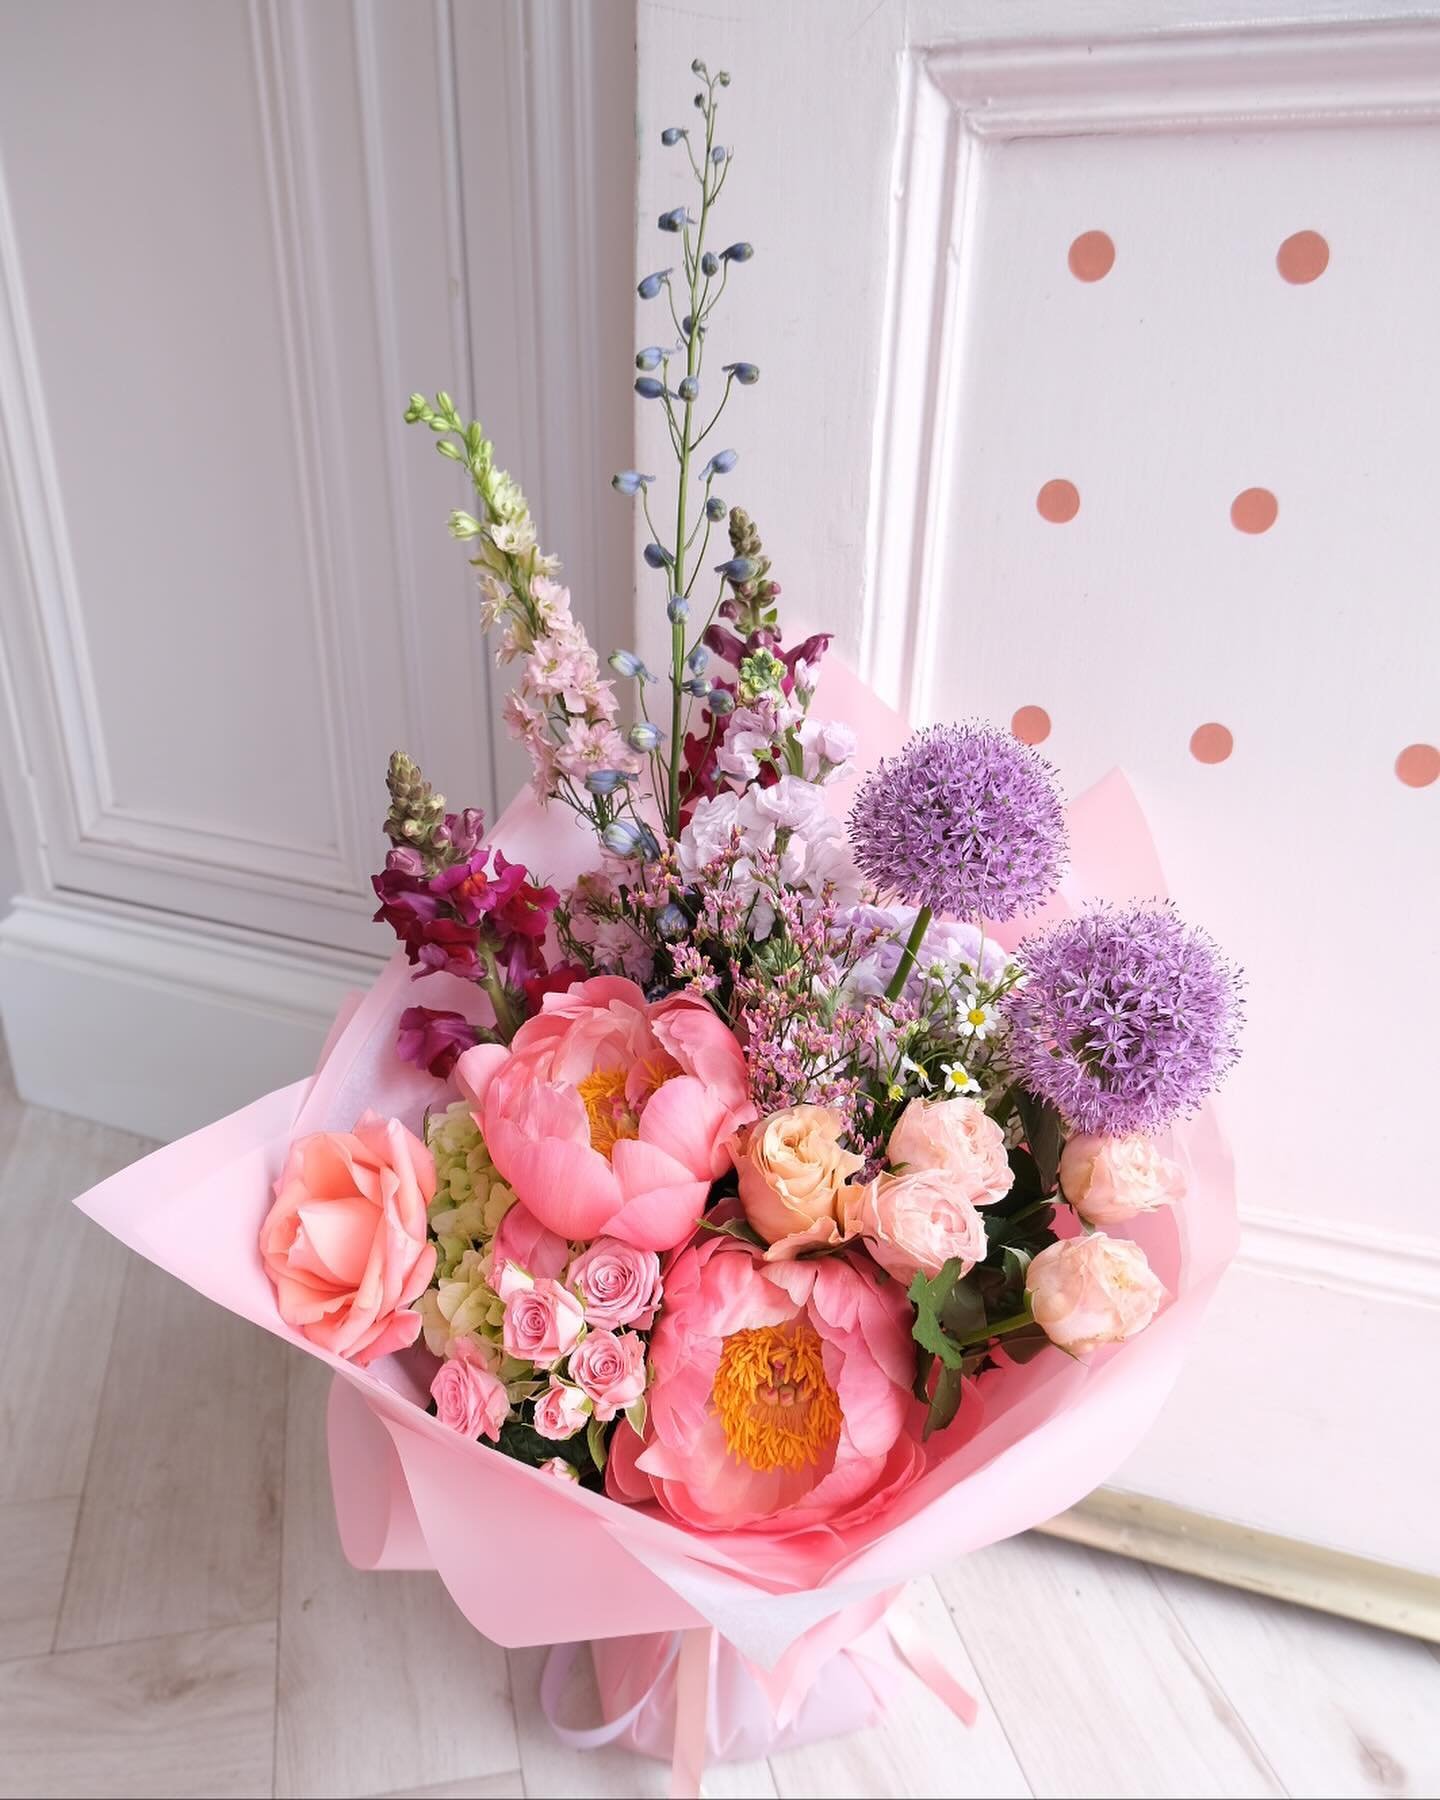 Introducing this week&rsquo;s design &ldquo;The Blousy Blooms Bouquet&rdquo;! 

Glorious Coral Charm Peonies, Hydrangeas, Roses and Alliums all arranged in our signature pink wrap! 

And if that&rsquo;s not enough keep eyes peeled on Thursday for the